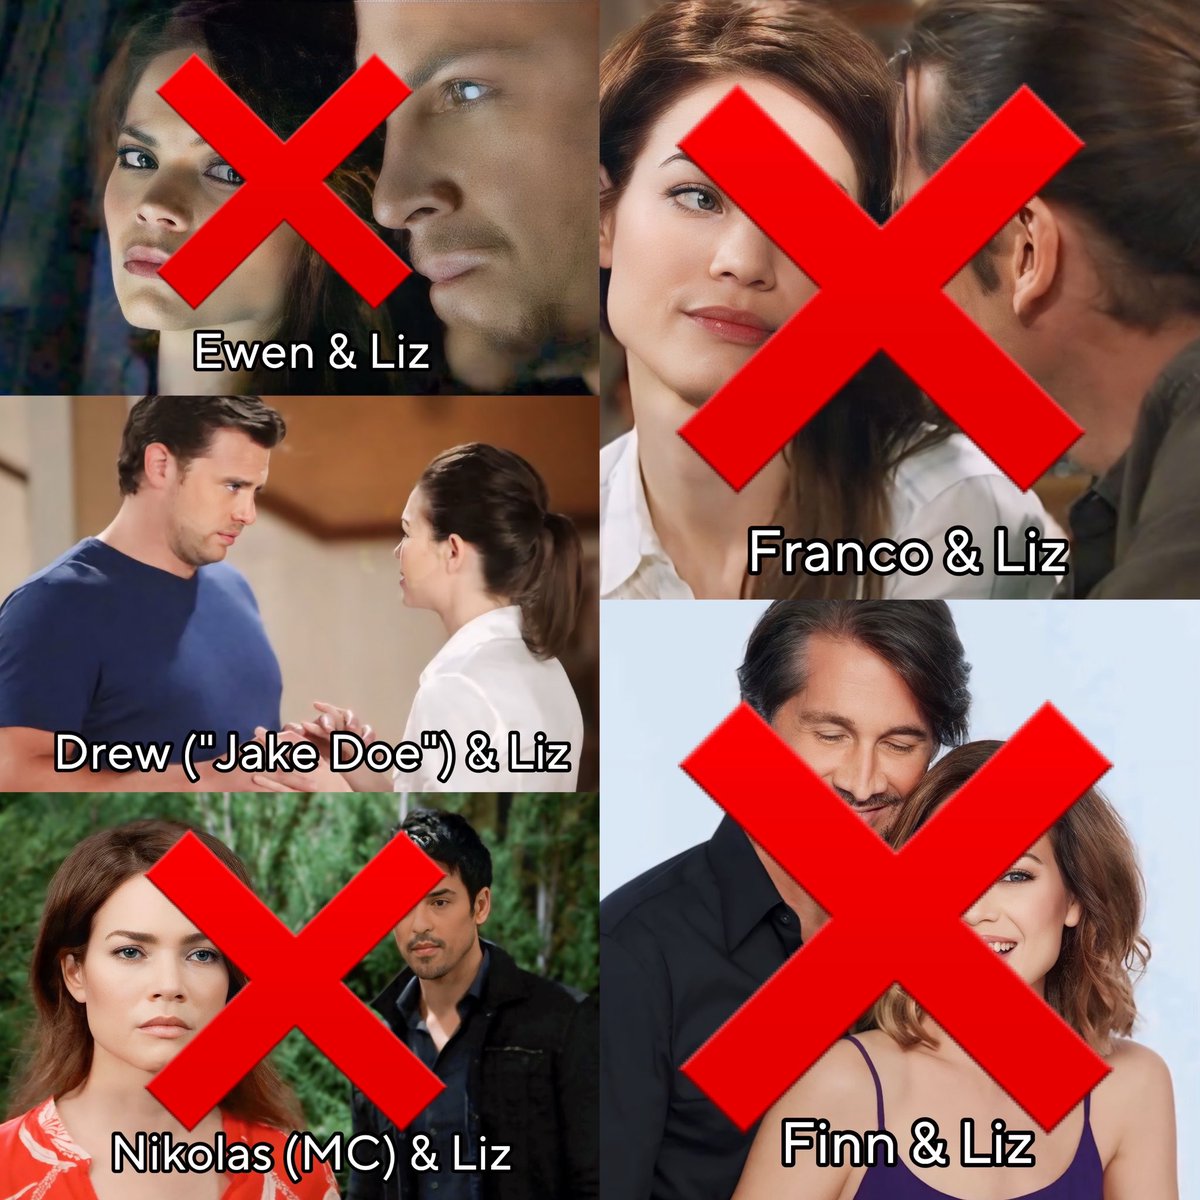 Elizabeth’s love life Elimination game ✨
*Round 11!*

Lucky (GV version) is out! ❌

It’s now between Nikolas (TC), Jason & Drew.

Choose your LEAST favorite Elizabeth ship over the last 26 years! 
• Only choose one or the vote won’t count.
#GH #LizFF #Niz #Liason #LnL2 #Lake